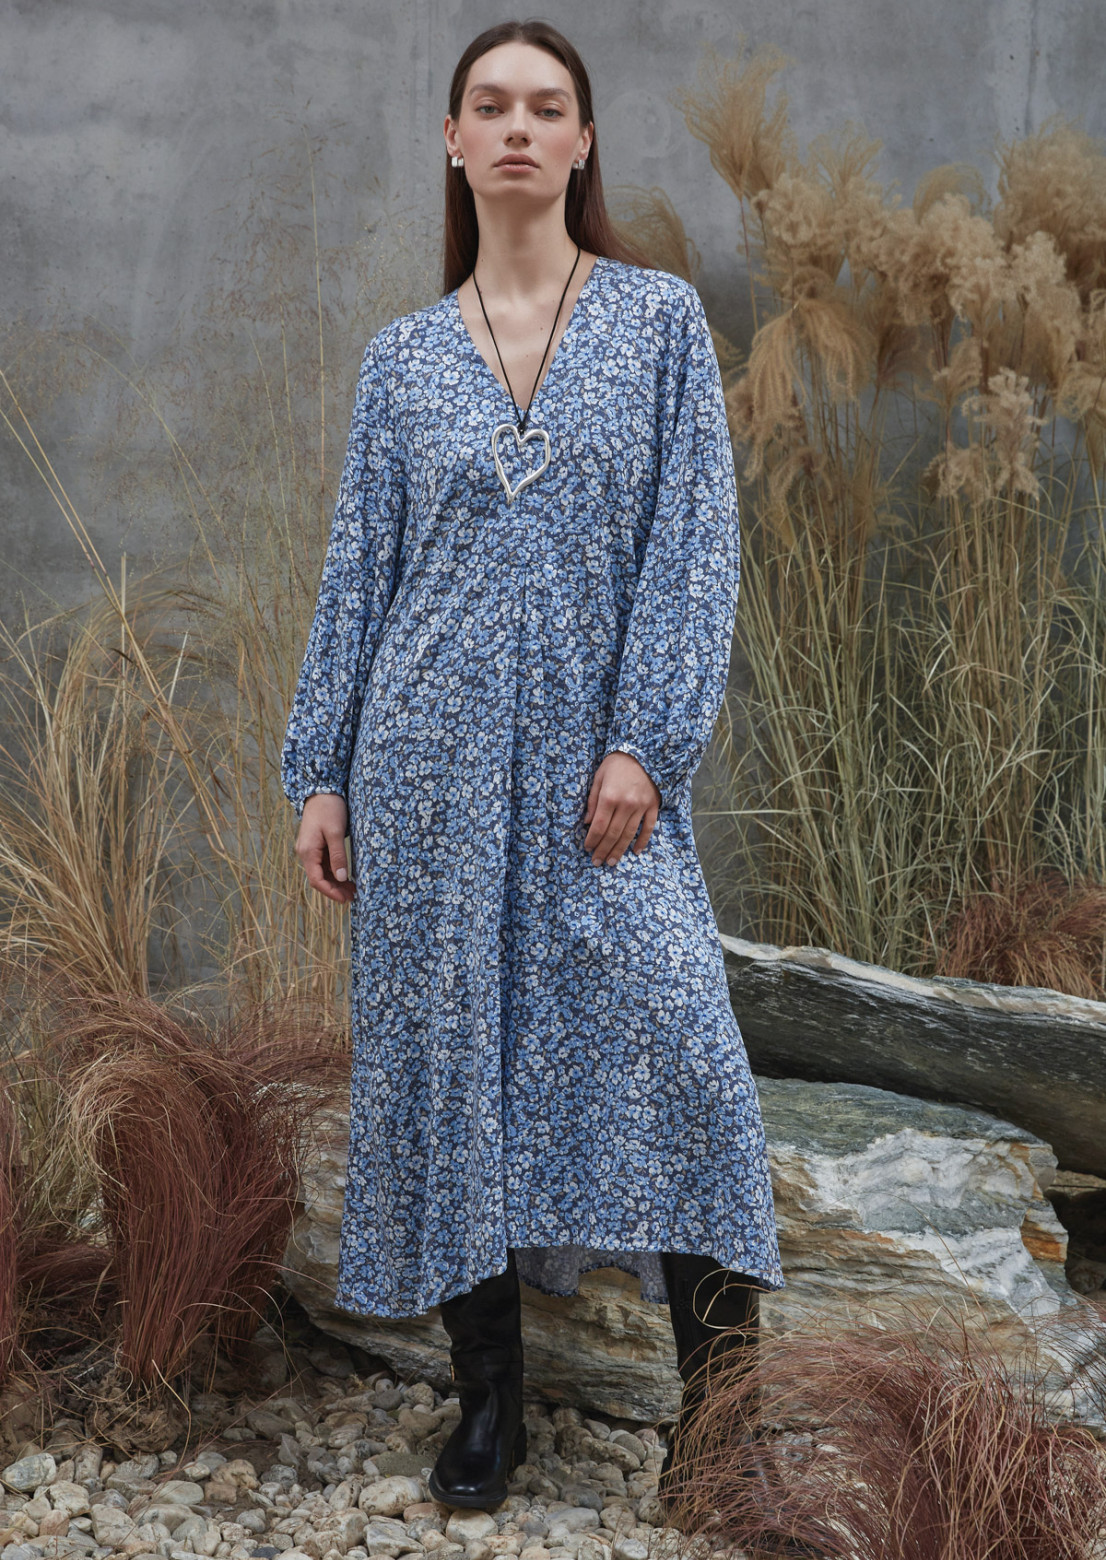 Grey-blue color dress in a flower pattern with voluminous sleeves